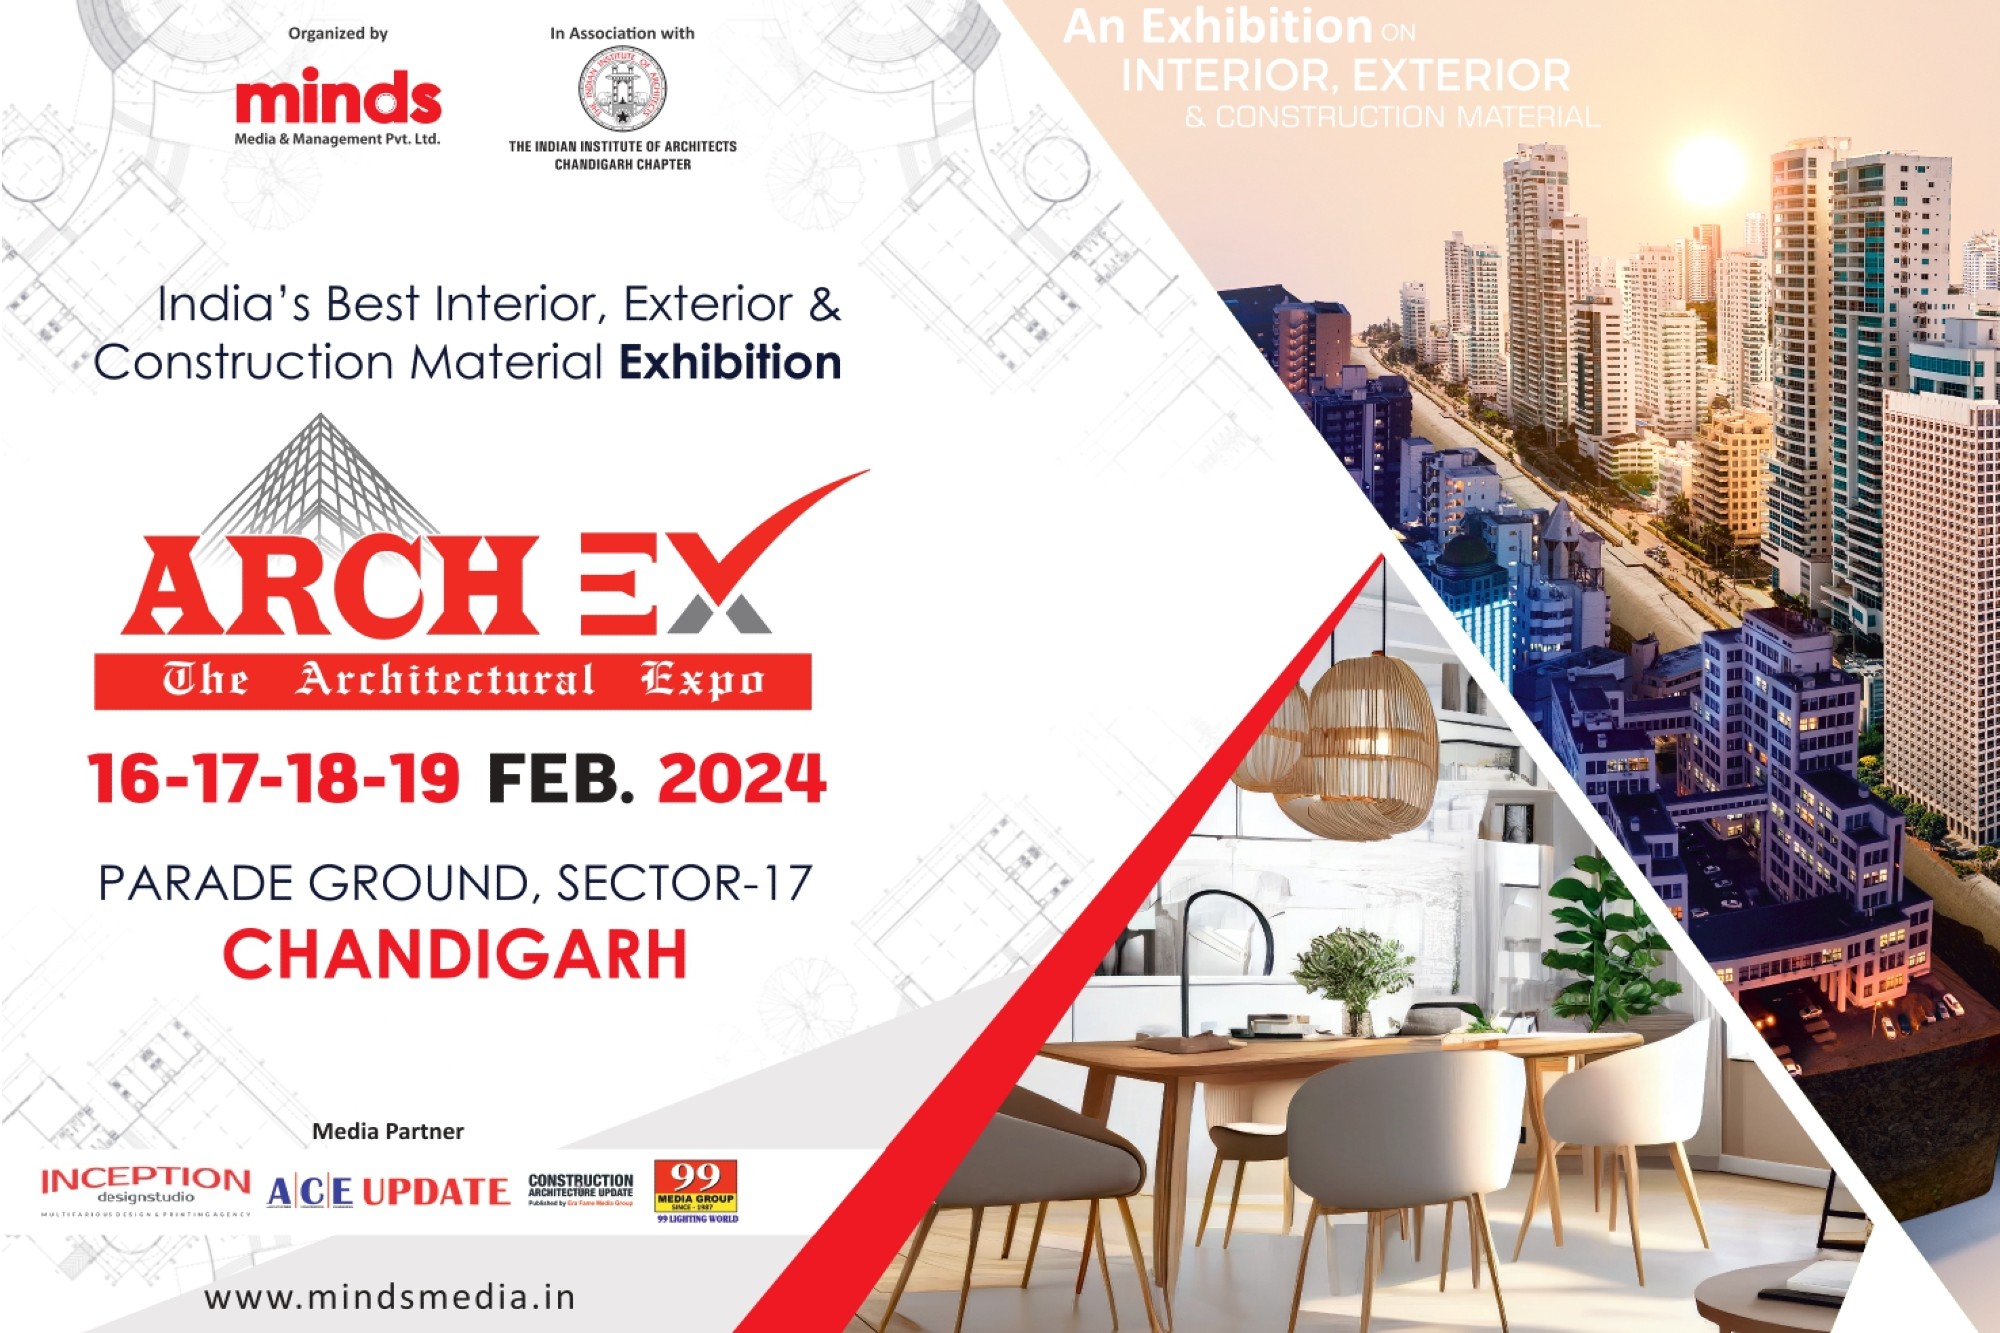 ARCHEX – The Architectural Expo at Chandigarh